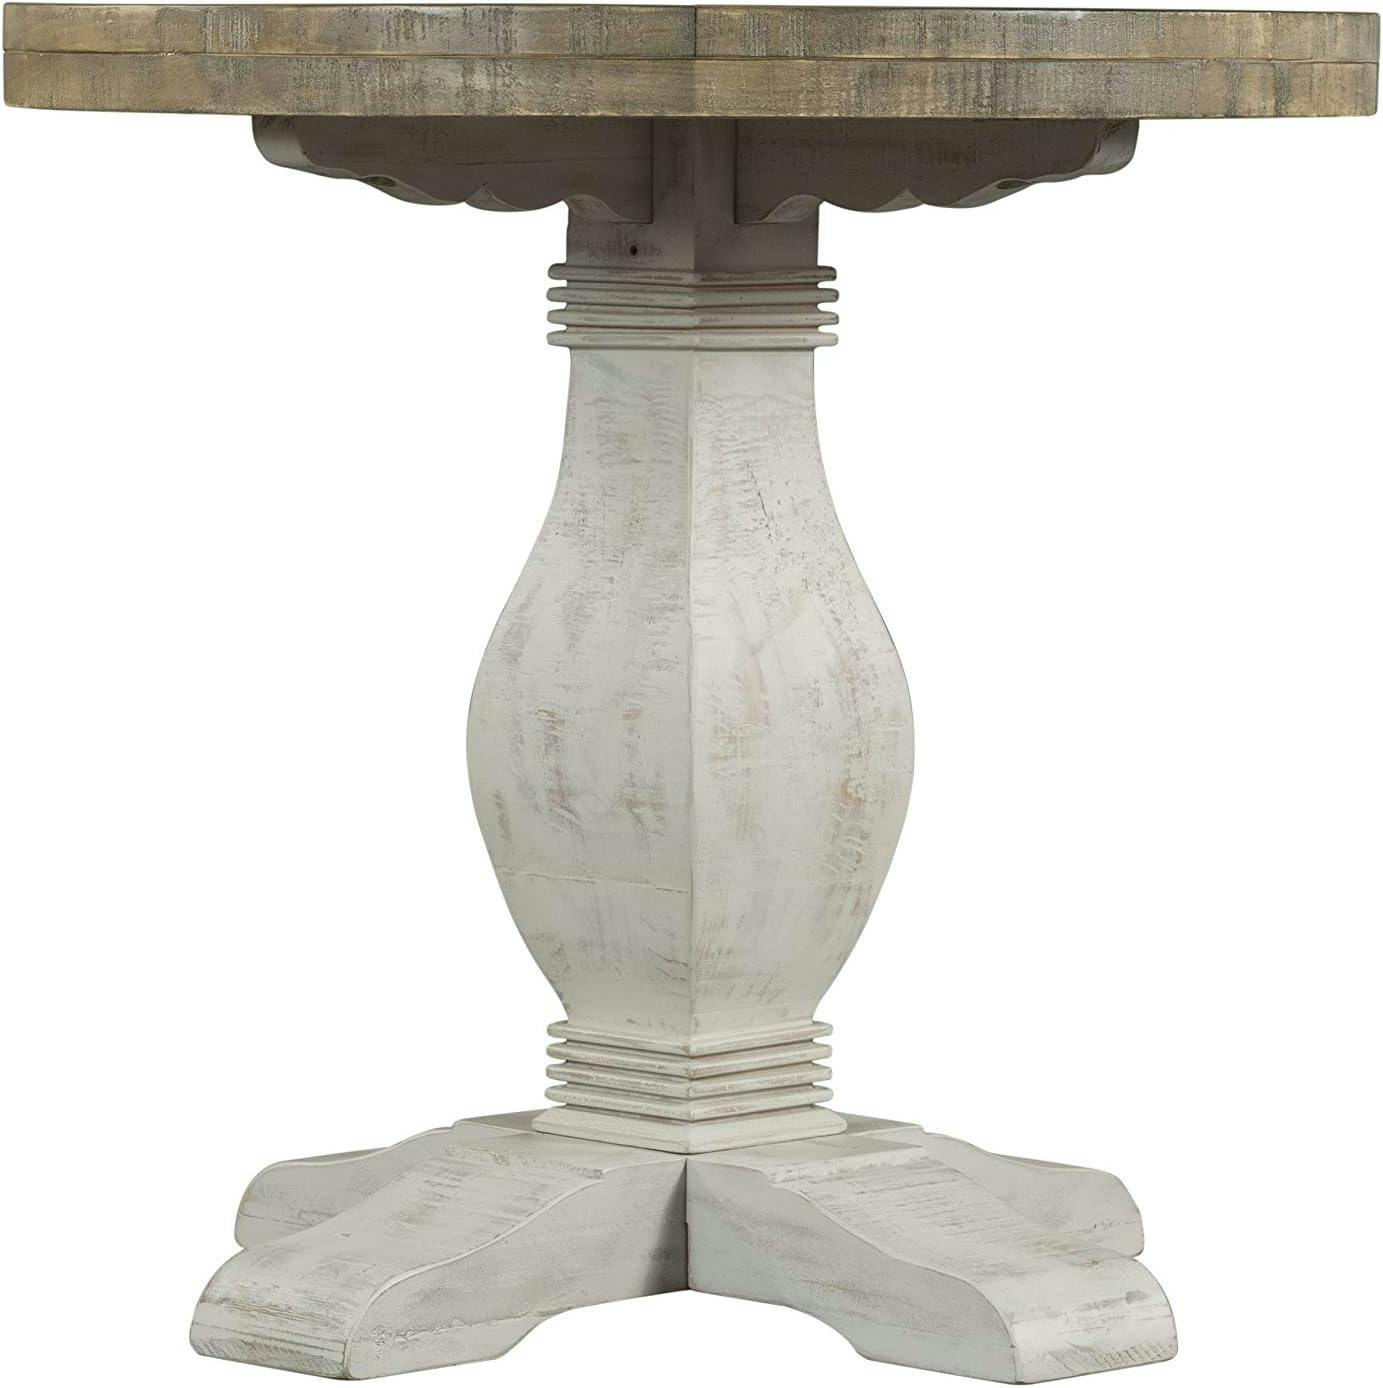 Casual Farmhouse Baluster Round End Table in Reclaimed Natural & White